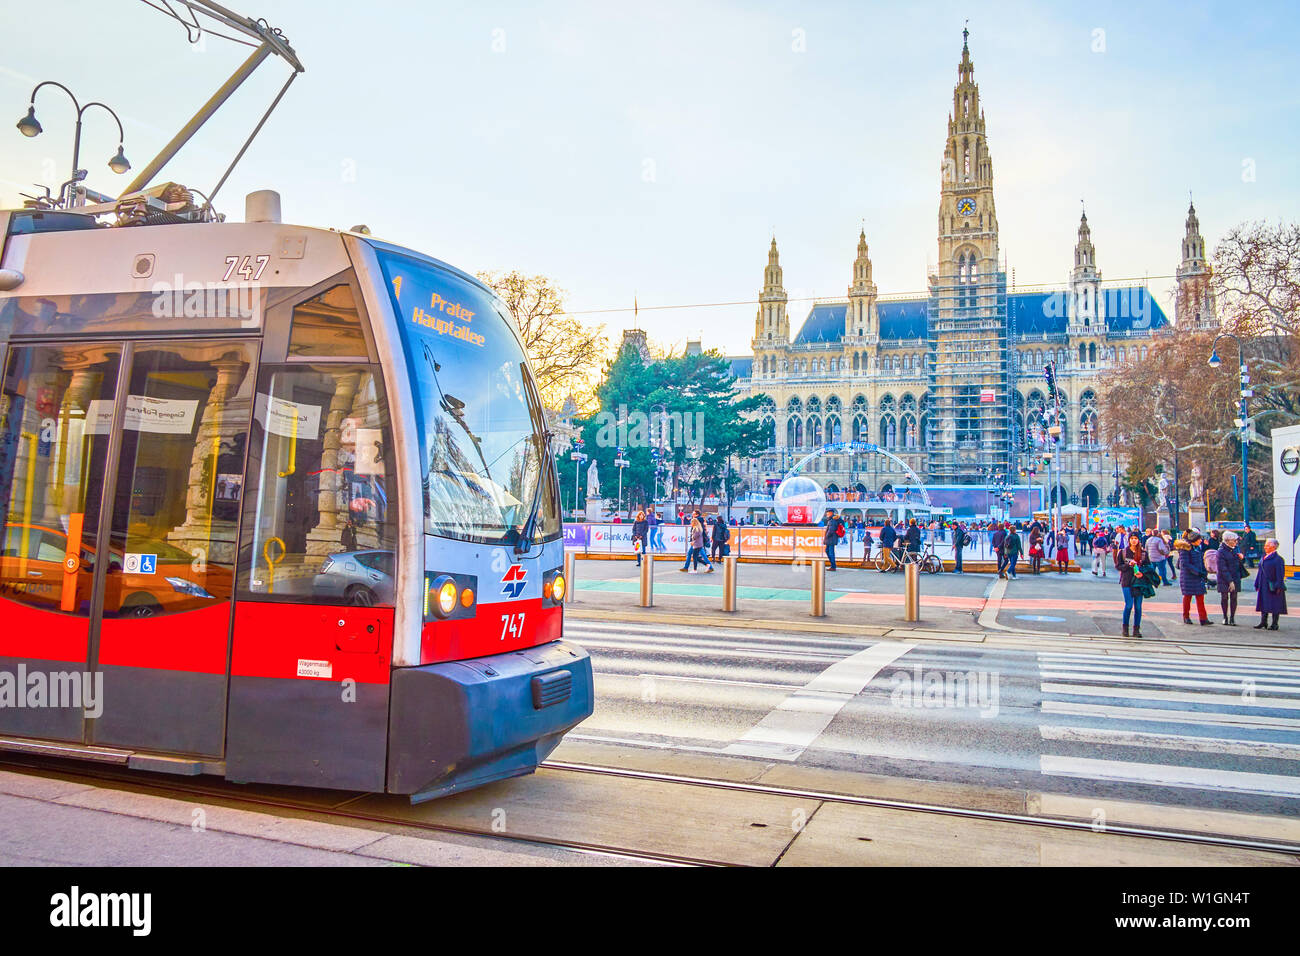 VIENNA, AUSTRIA - FEBRUARY 18, 2019: The modern tram rides along Ringstrasse, passing Rathausplatz with winter skating ring and beautiful Town Hall, o Stock Photo